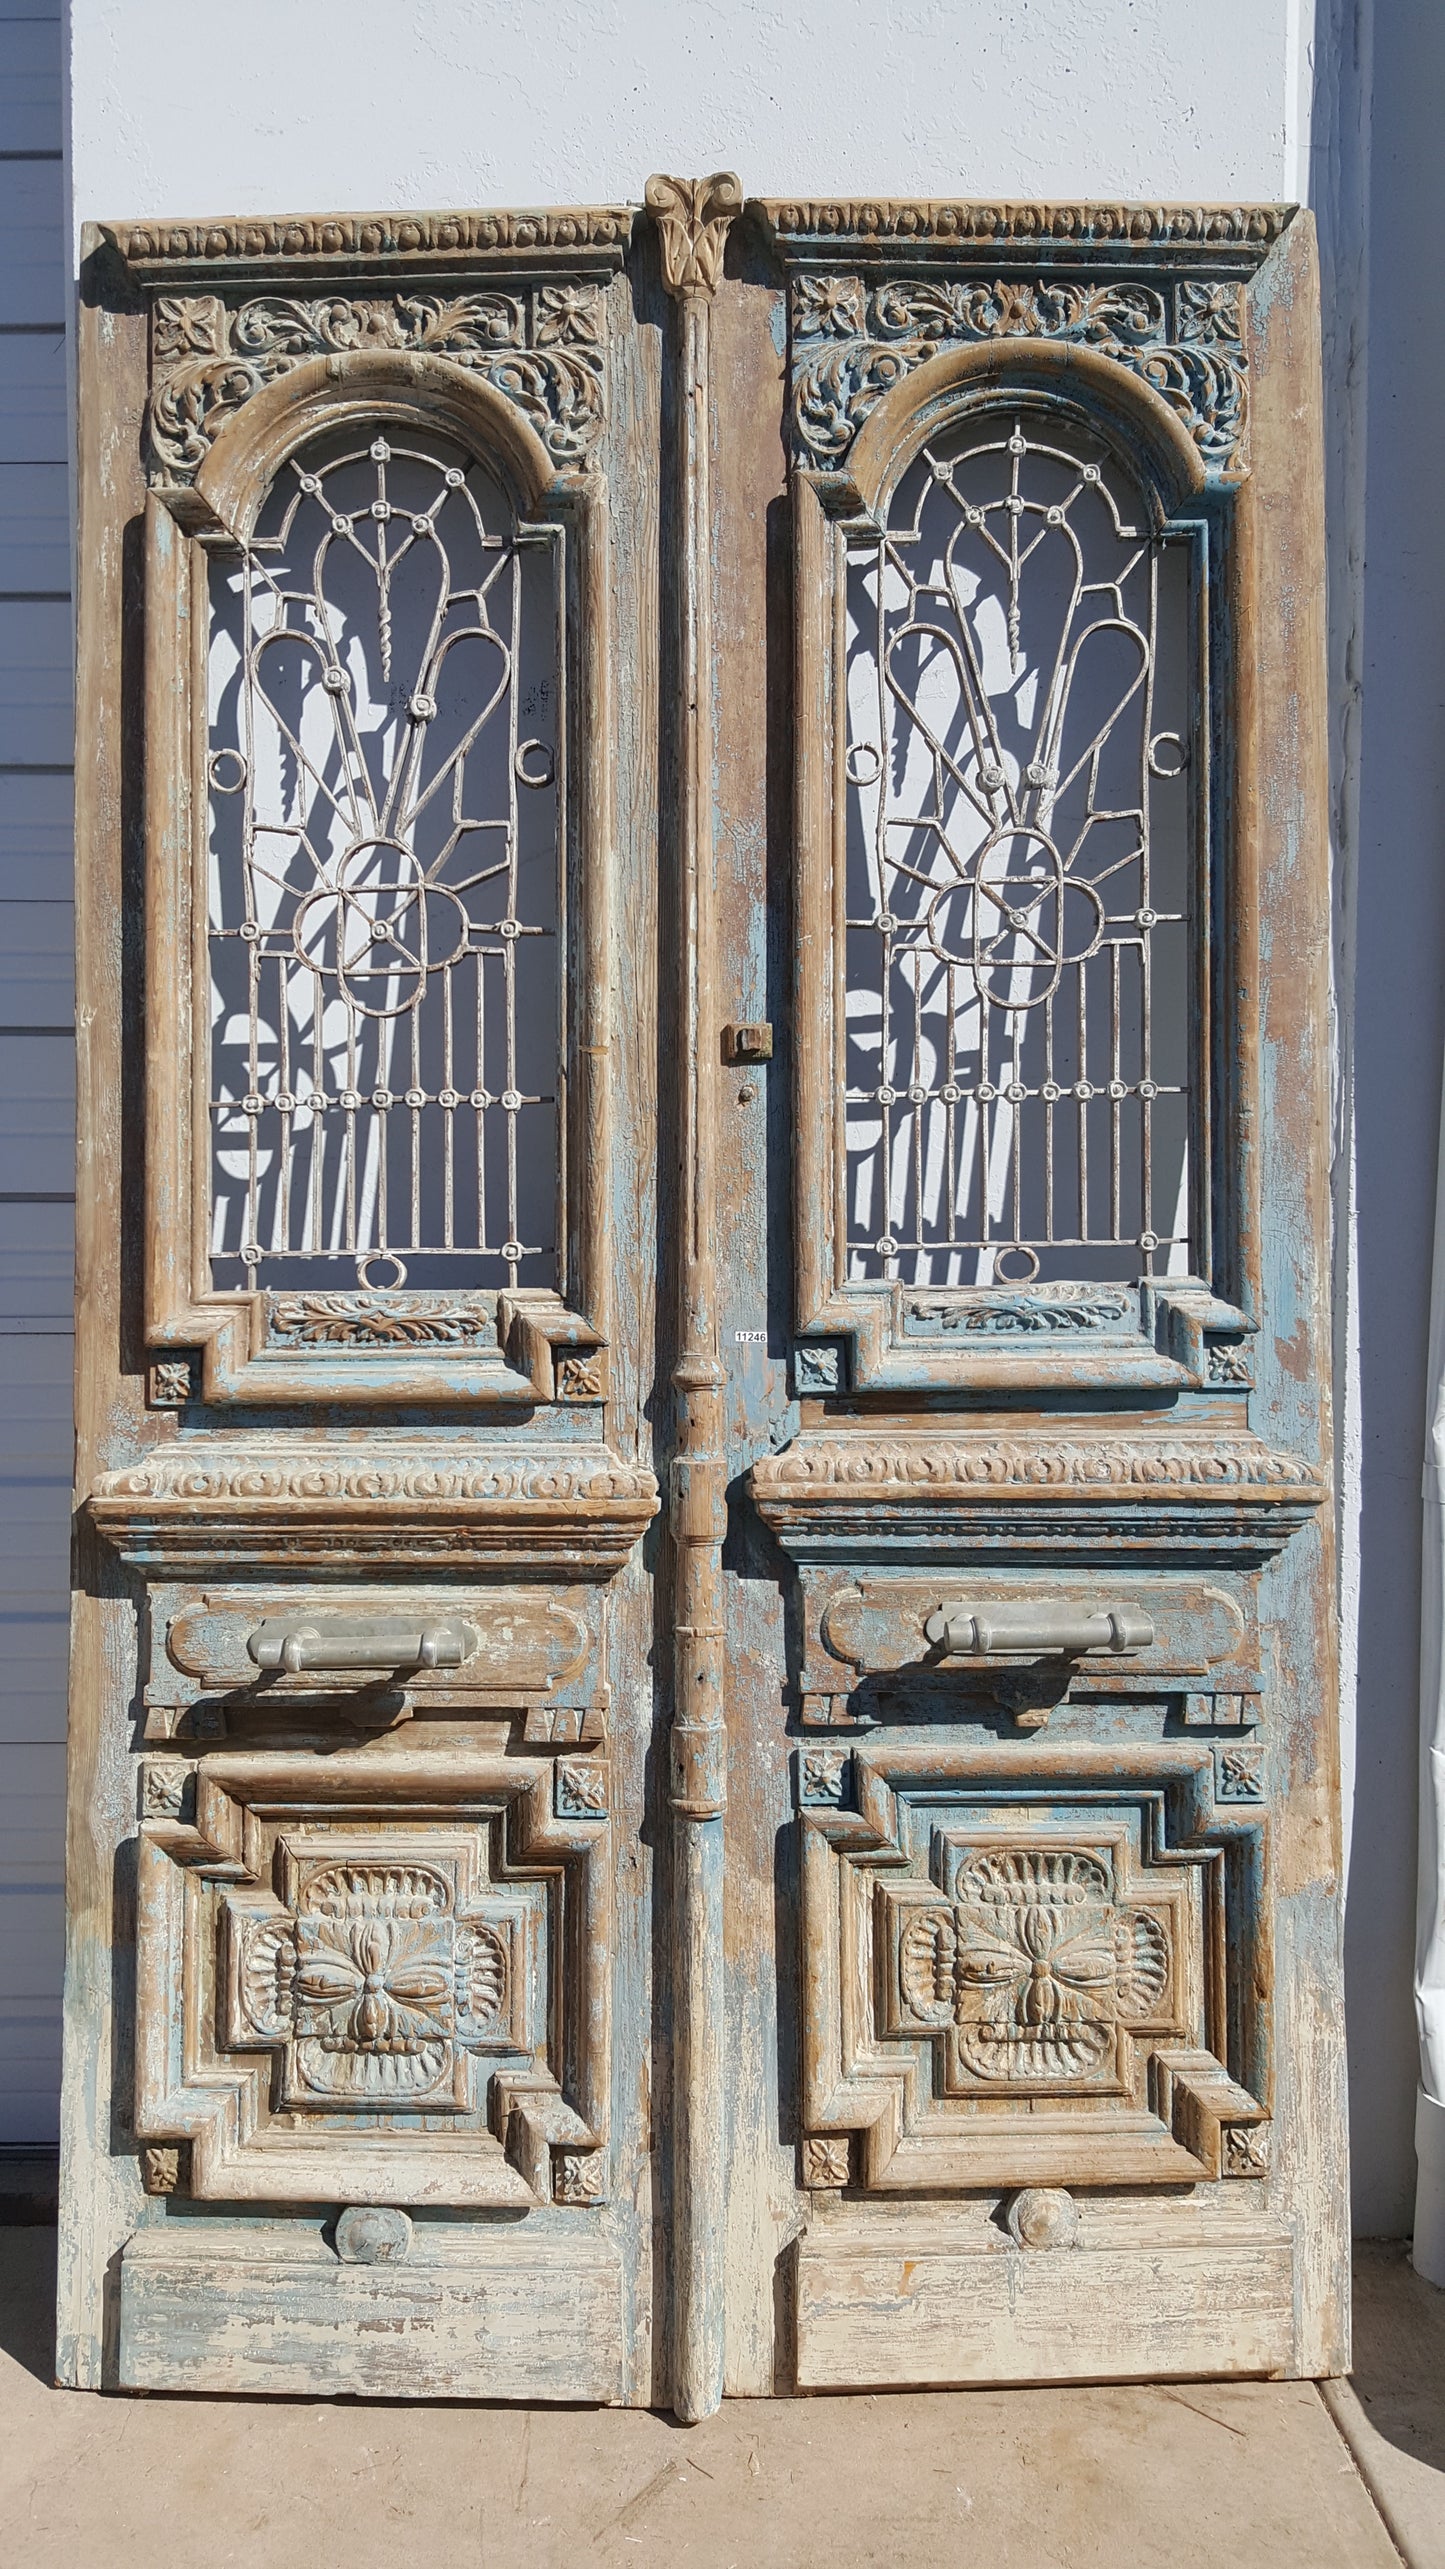 Pair of Ornate Wood Carved Antique Doors with Iron Inserts (no glass)